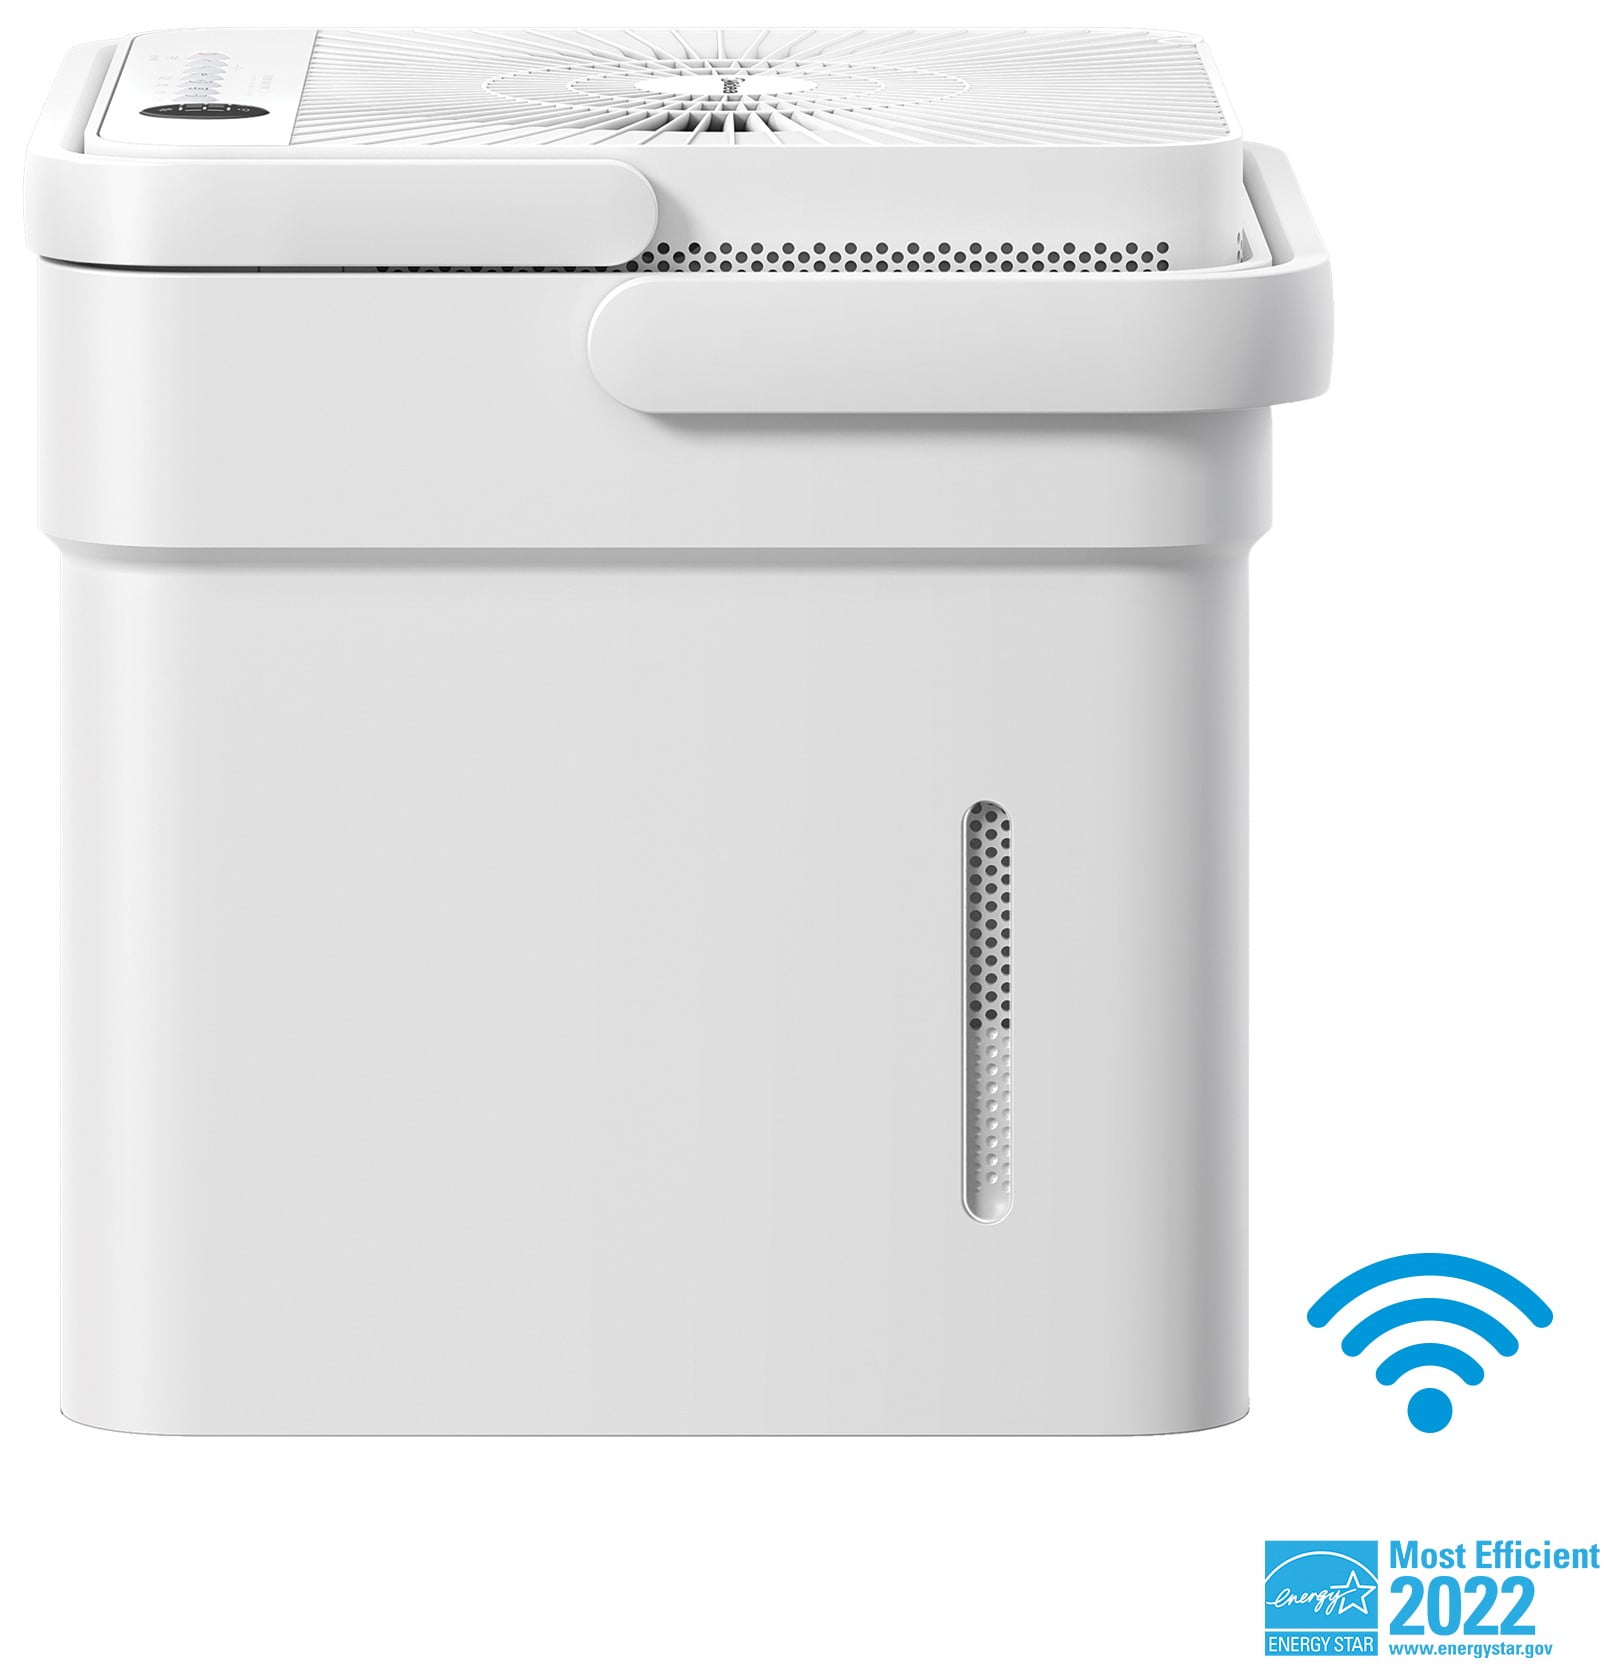 Midea Cube 20-Pint Smart WiFi Dehumidifier, Coverage up to 2,000 sq. ft.